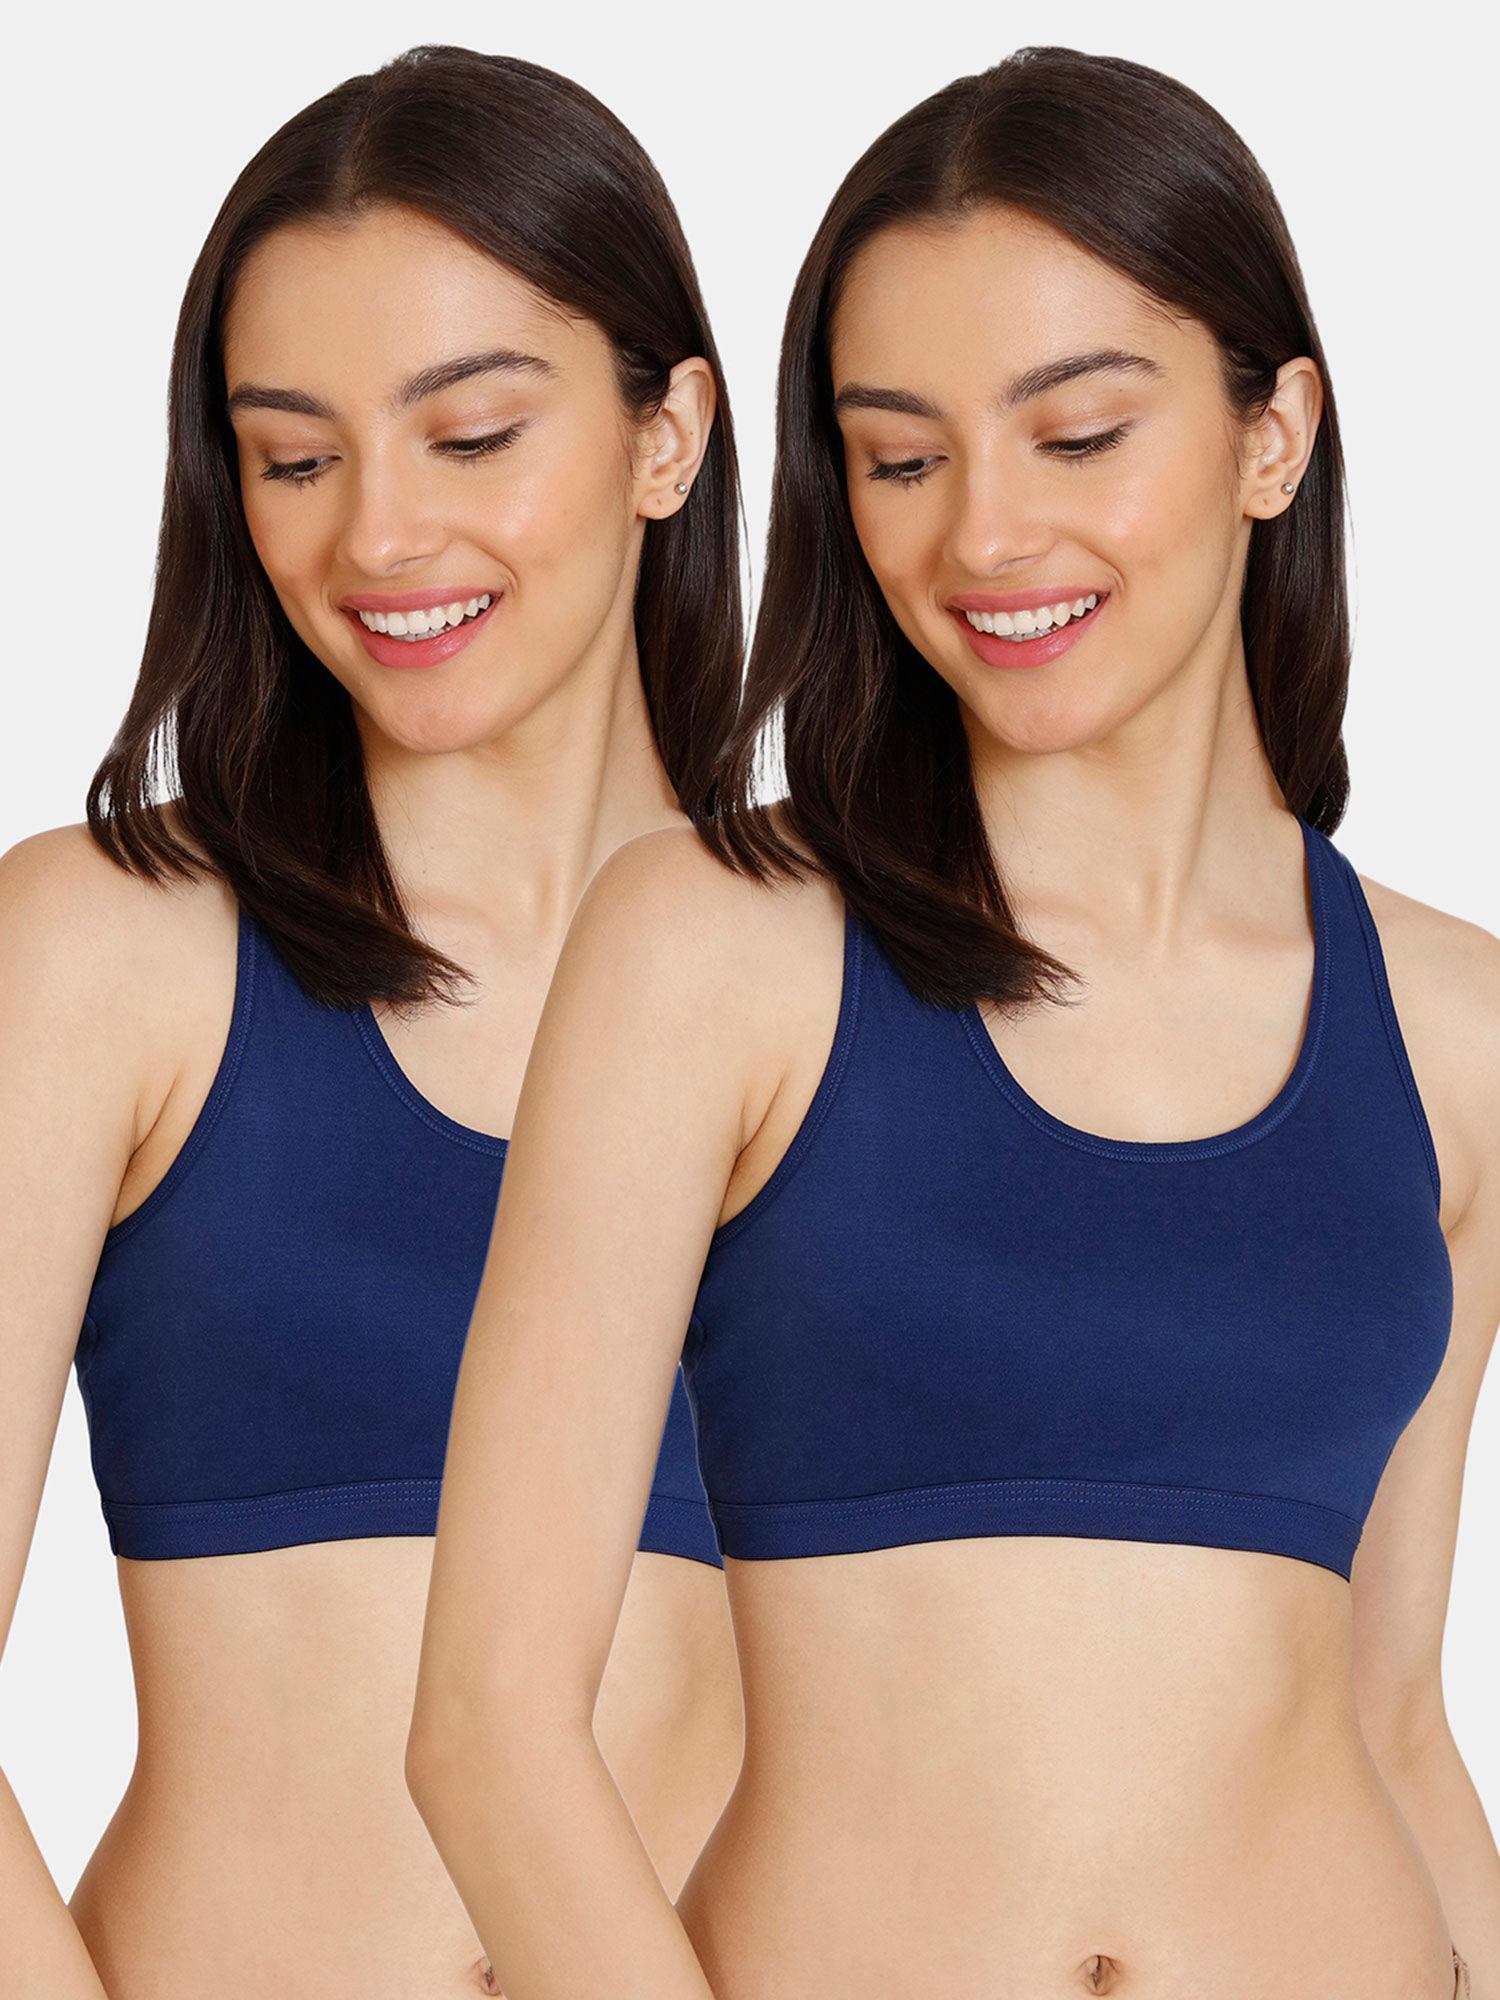 Girls Double Layered Non Wired Beginner Sports Bra Navy Blue (Pack of 2)